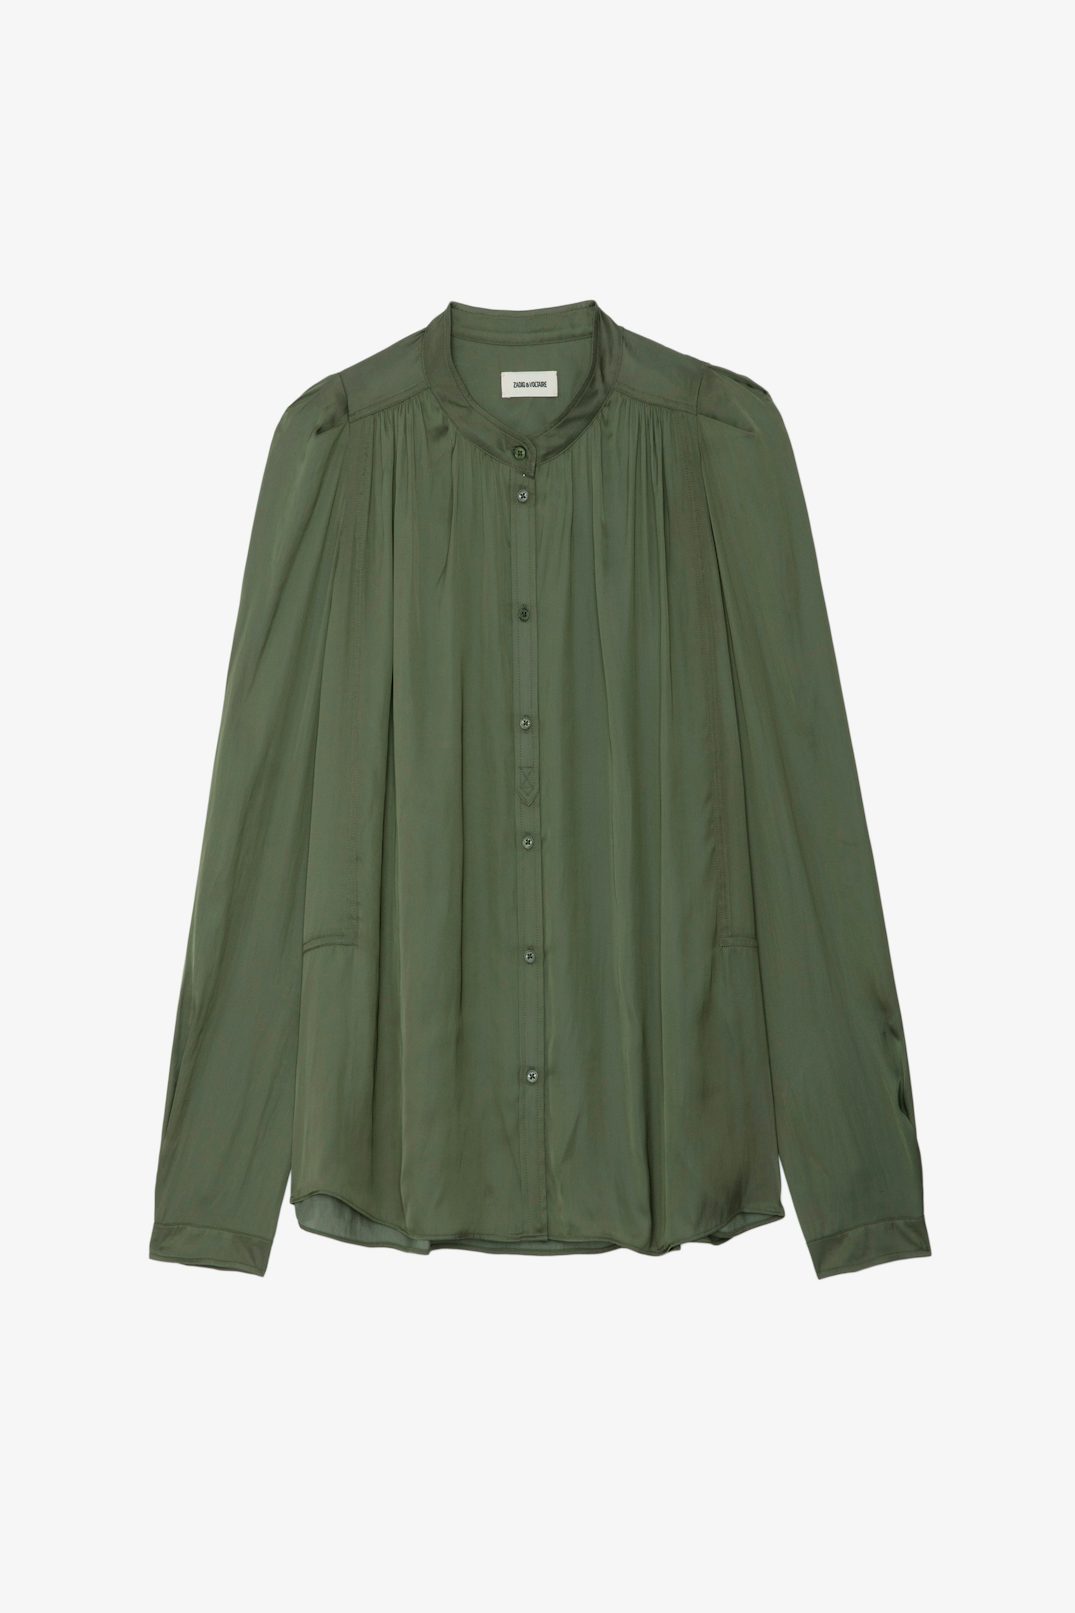 Women’s luxury blouses, camisoles, shirts and tops | Zadig&Voltaire